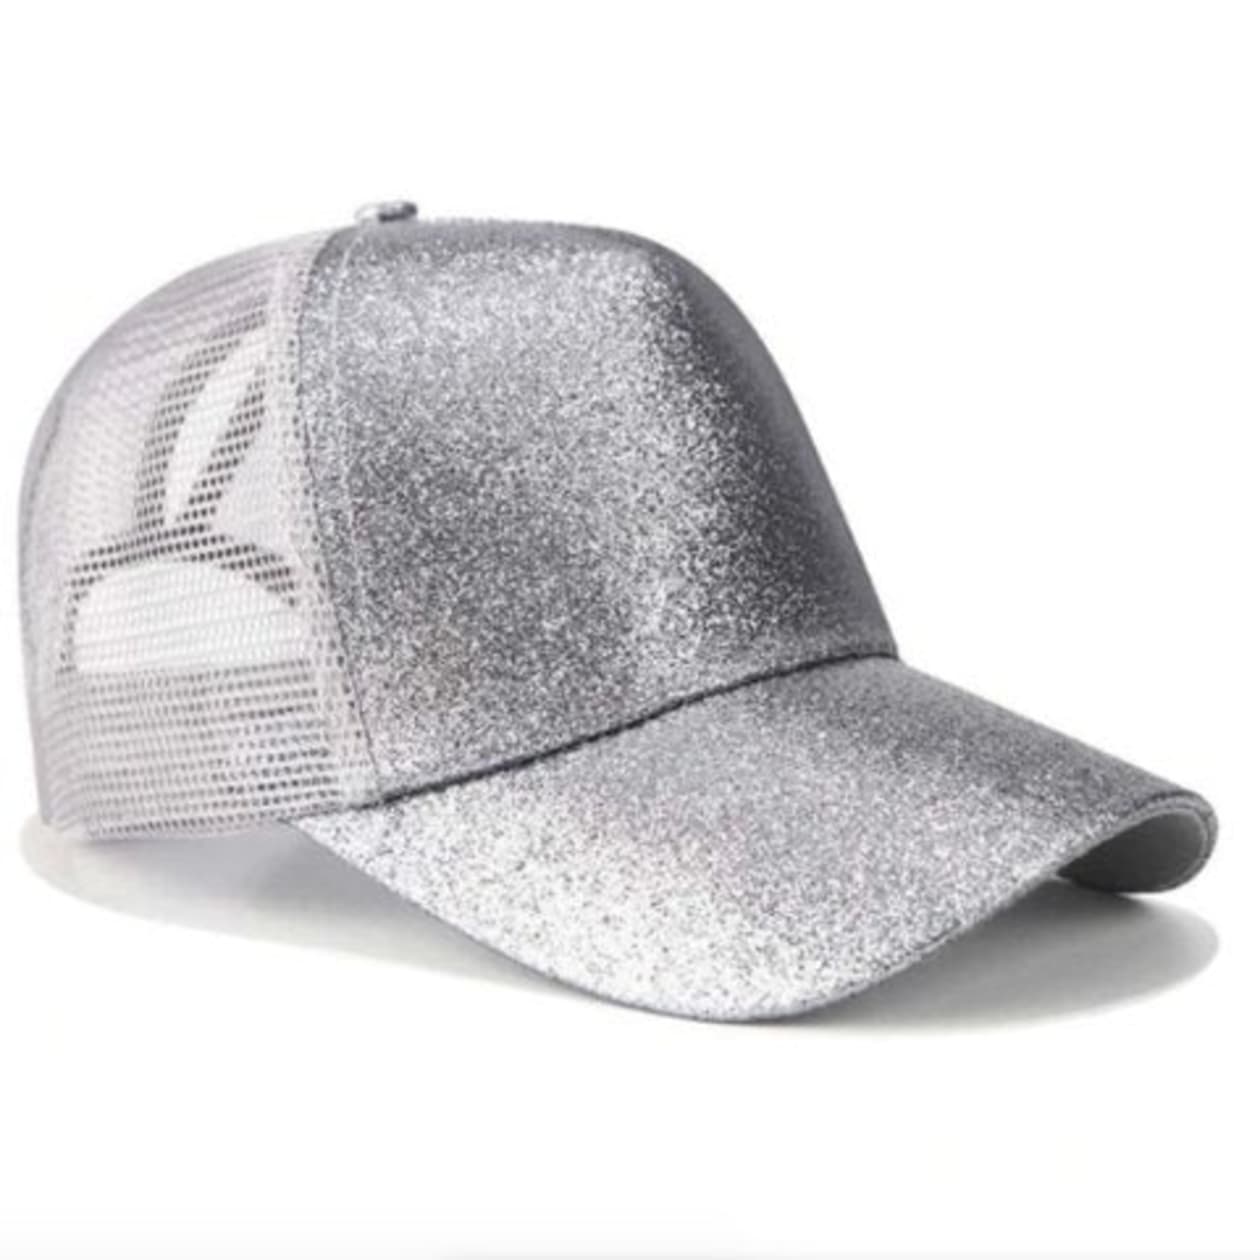 Glitter Snapback Cap with Ponytail Opening - Color: Glitter Silver